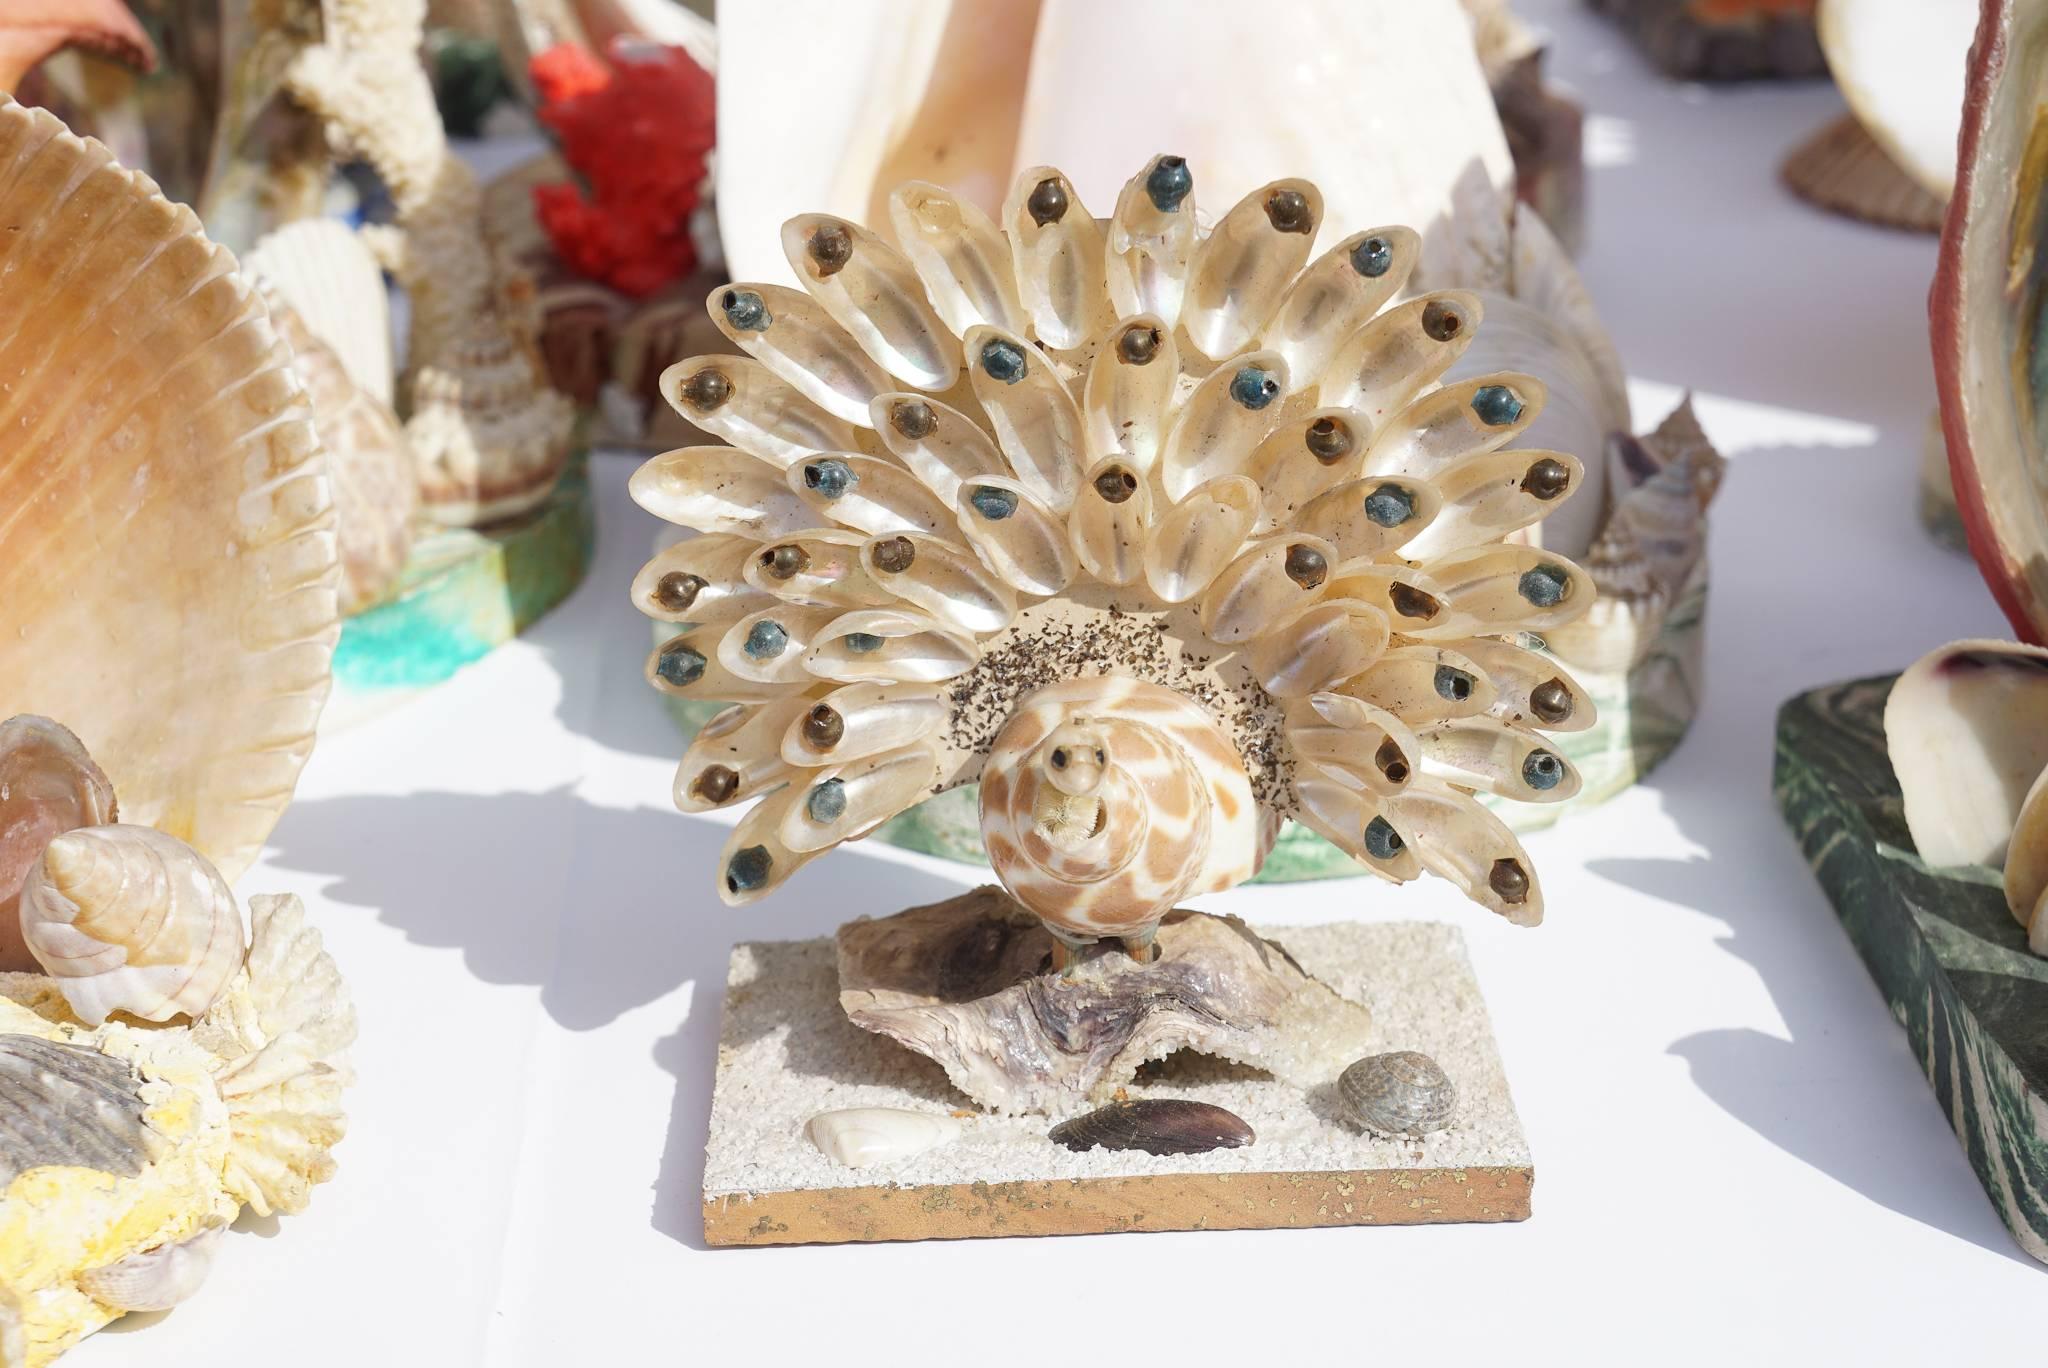 American Collection of 30 Vintage Shell, Coral and Plastic Sea Side Souvenir Sculptures